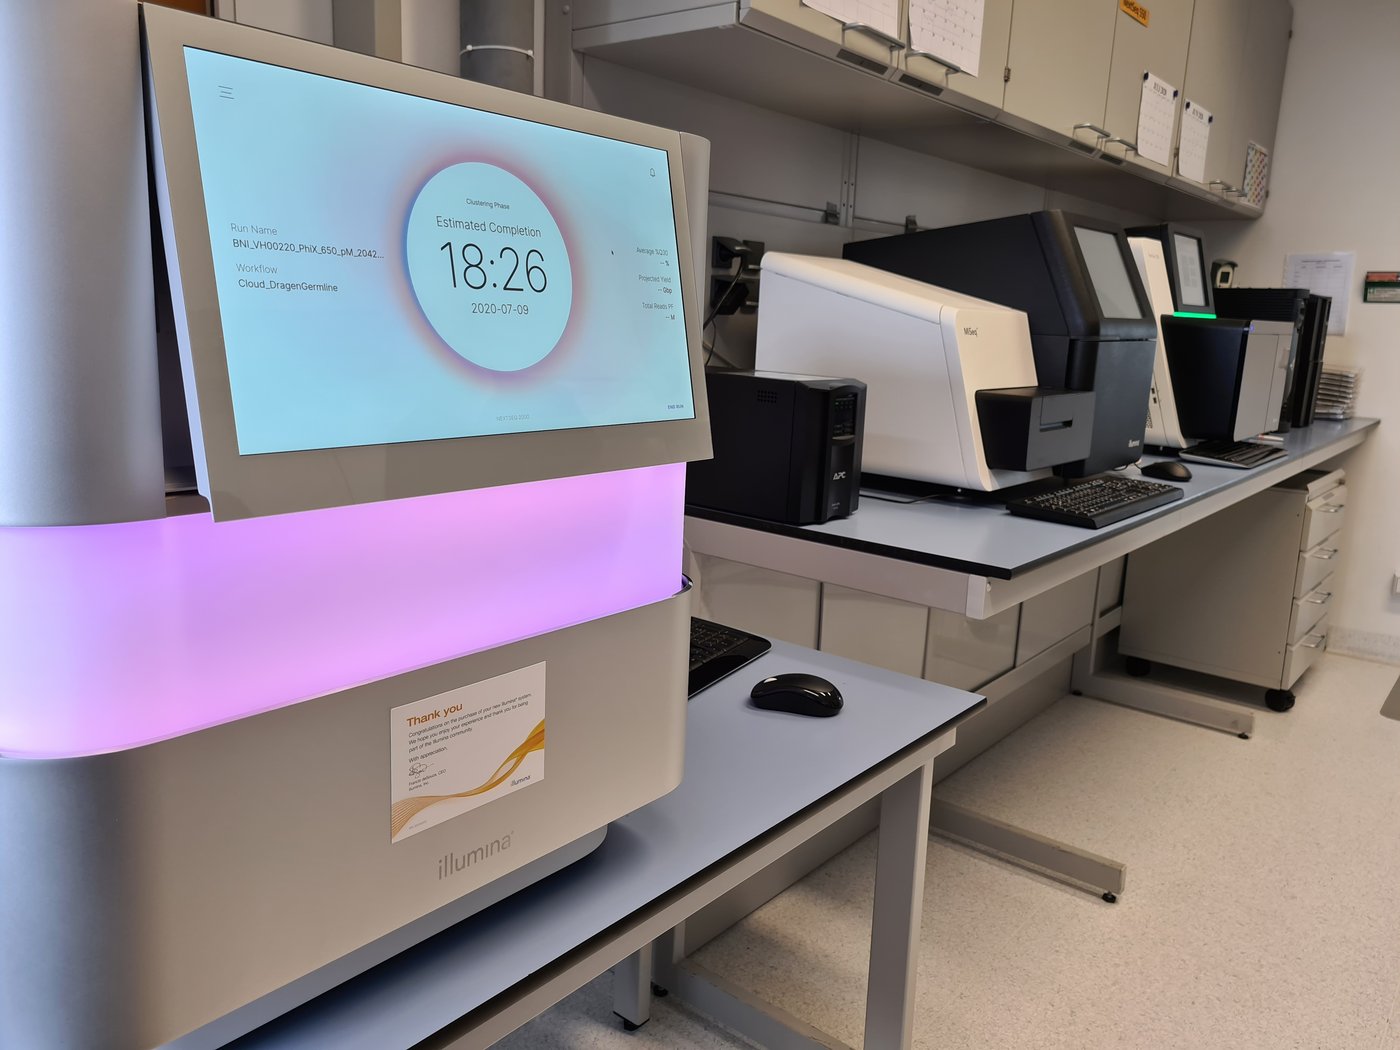 The Next-Generation Sequencing (NGS) unit of the BNITM can be seen. In the foreground is a large white box on a table. In the middle runs a wide luminous strip that glows pink-purple. At the top, you can see a large screen with the text estimated completion 18:26. In the background, there is more laboratory equipment on tables.